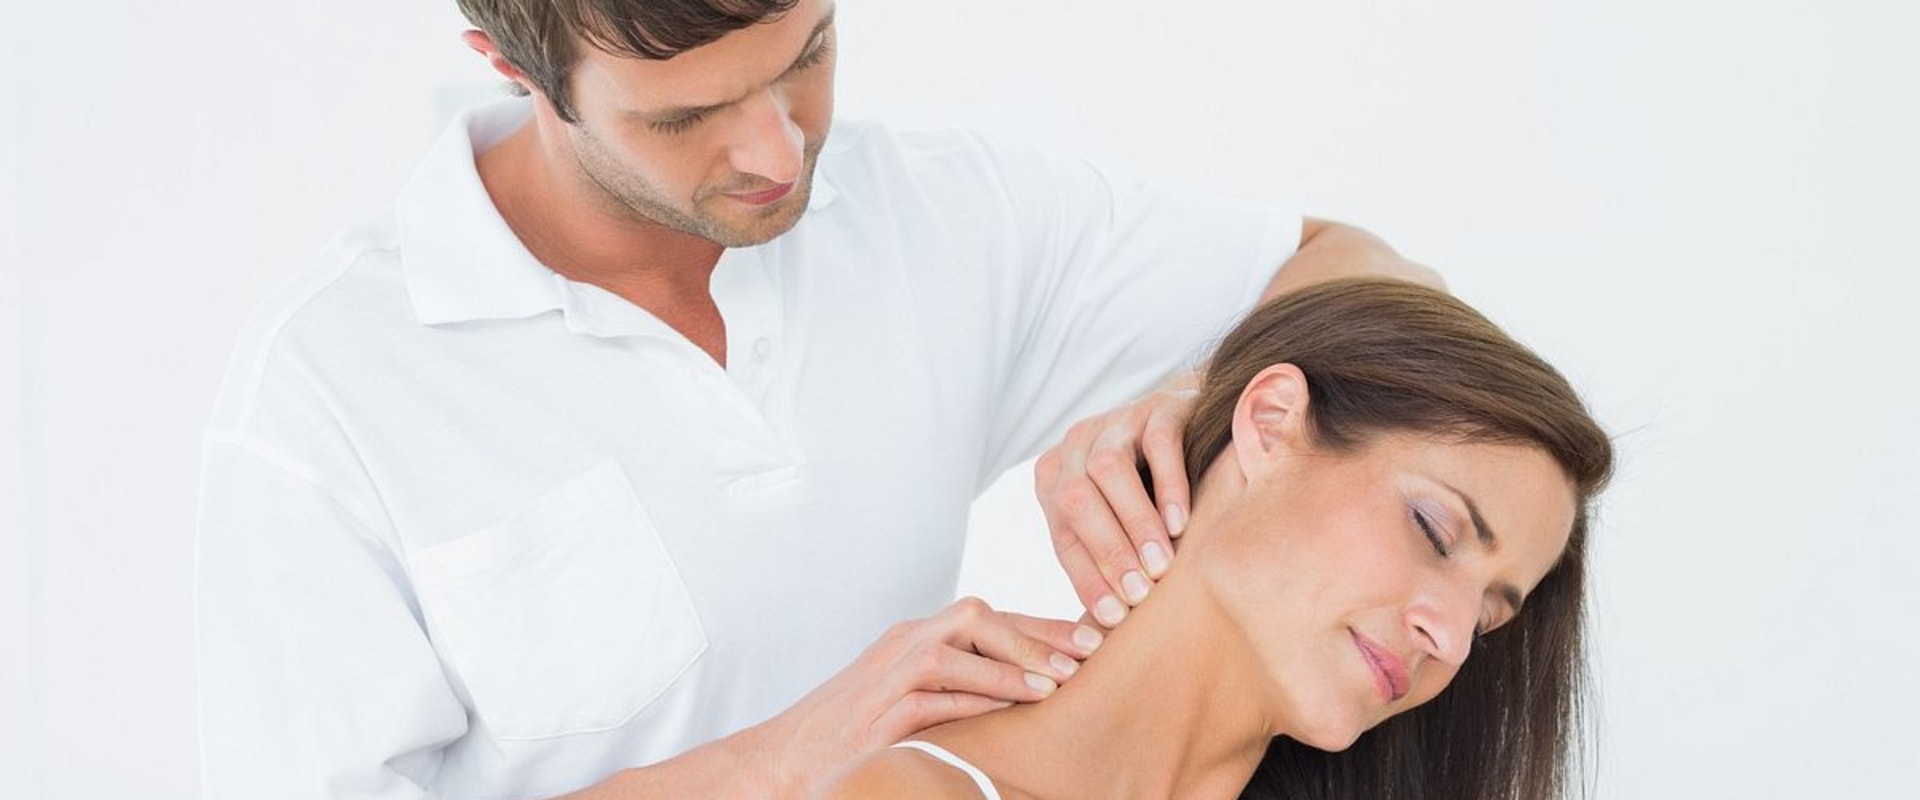 What Massage is Best for Back and Neck Pain Relief?